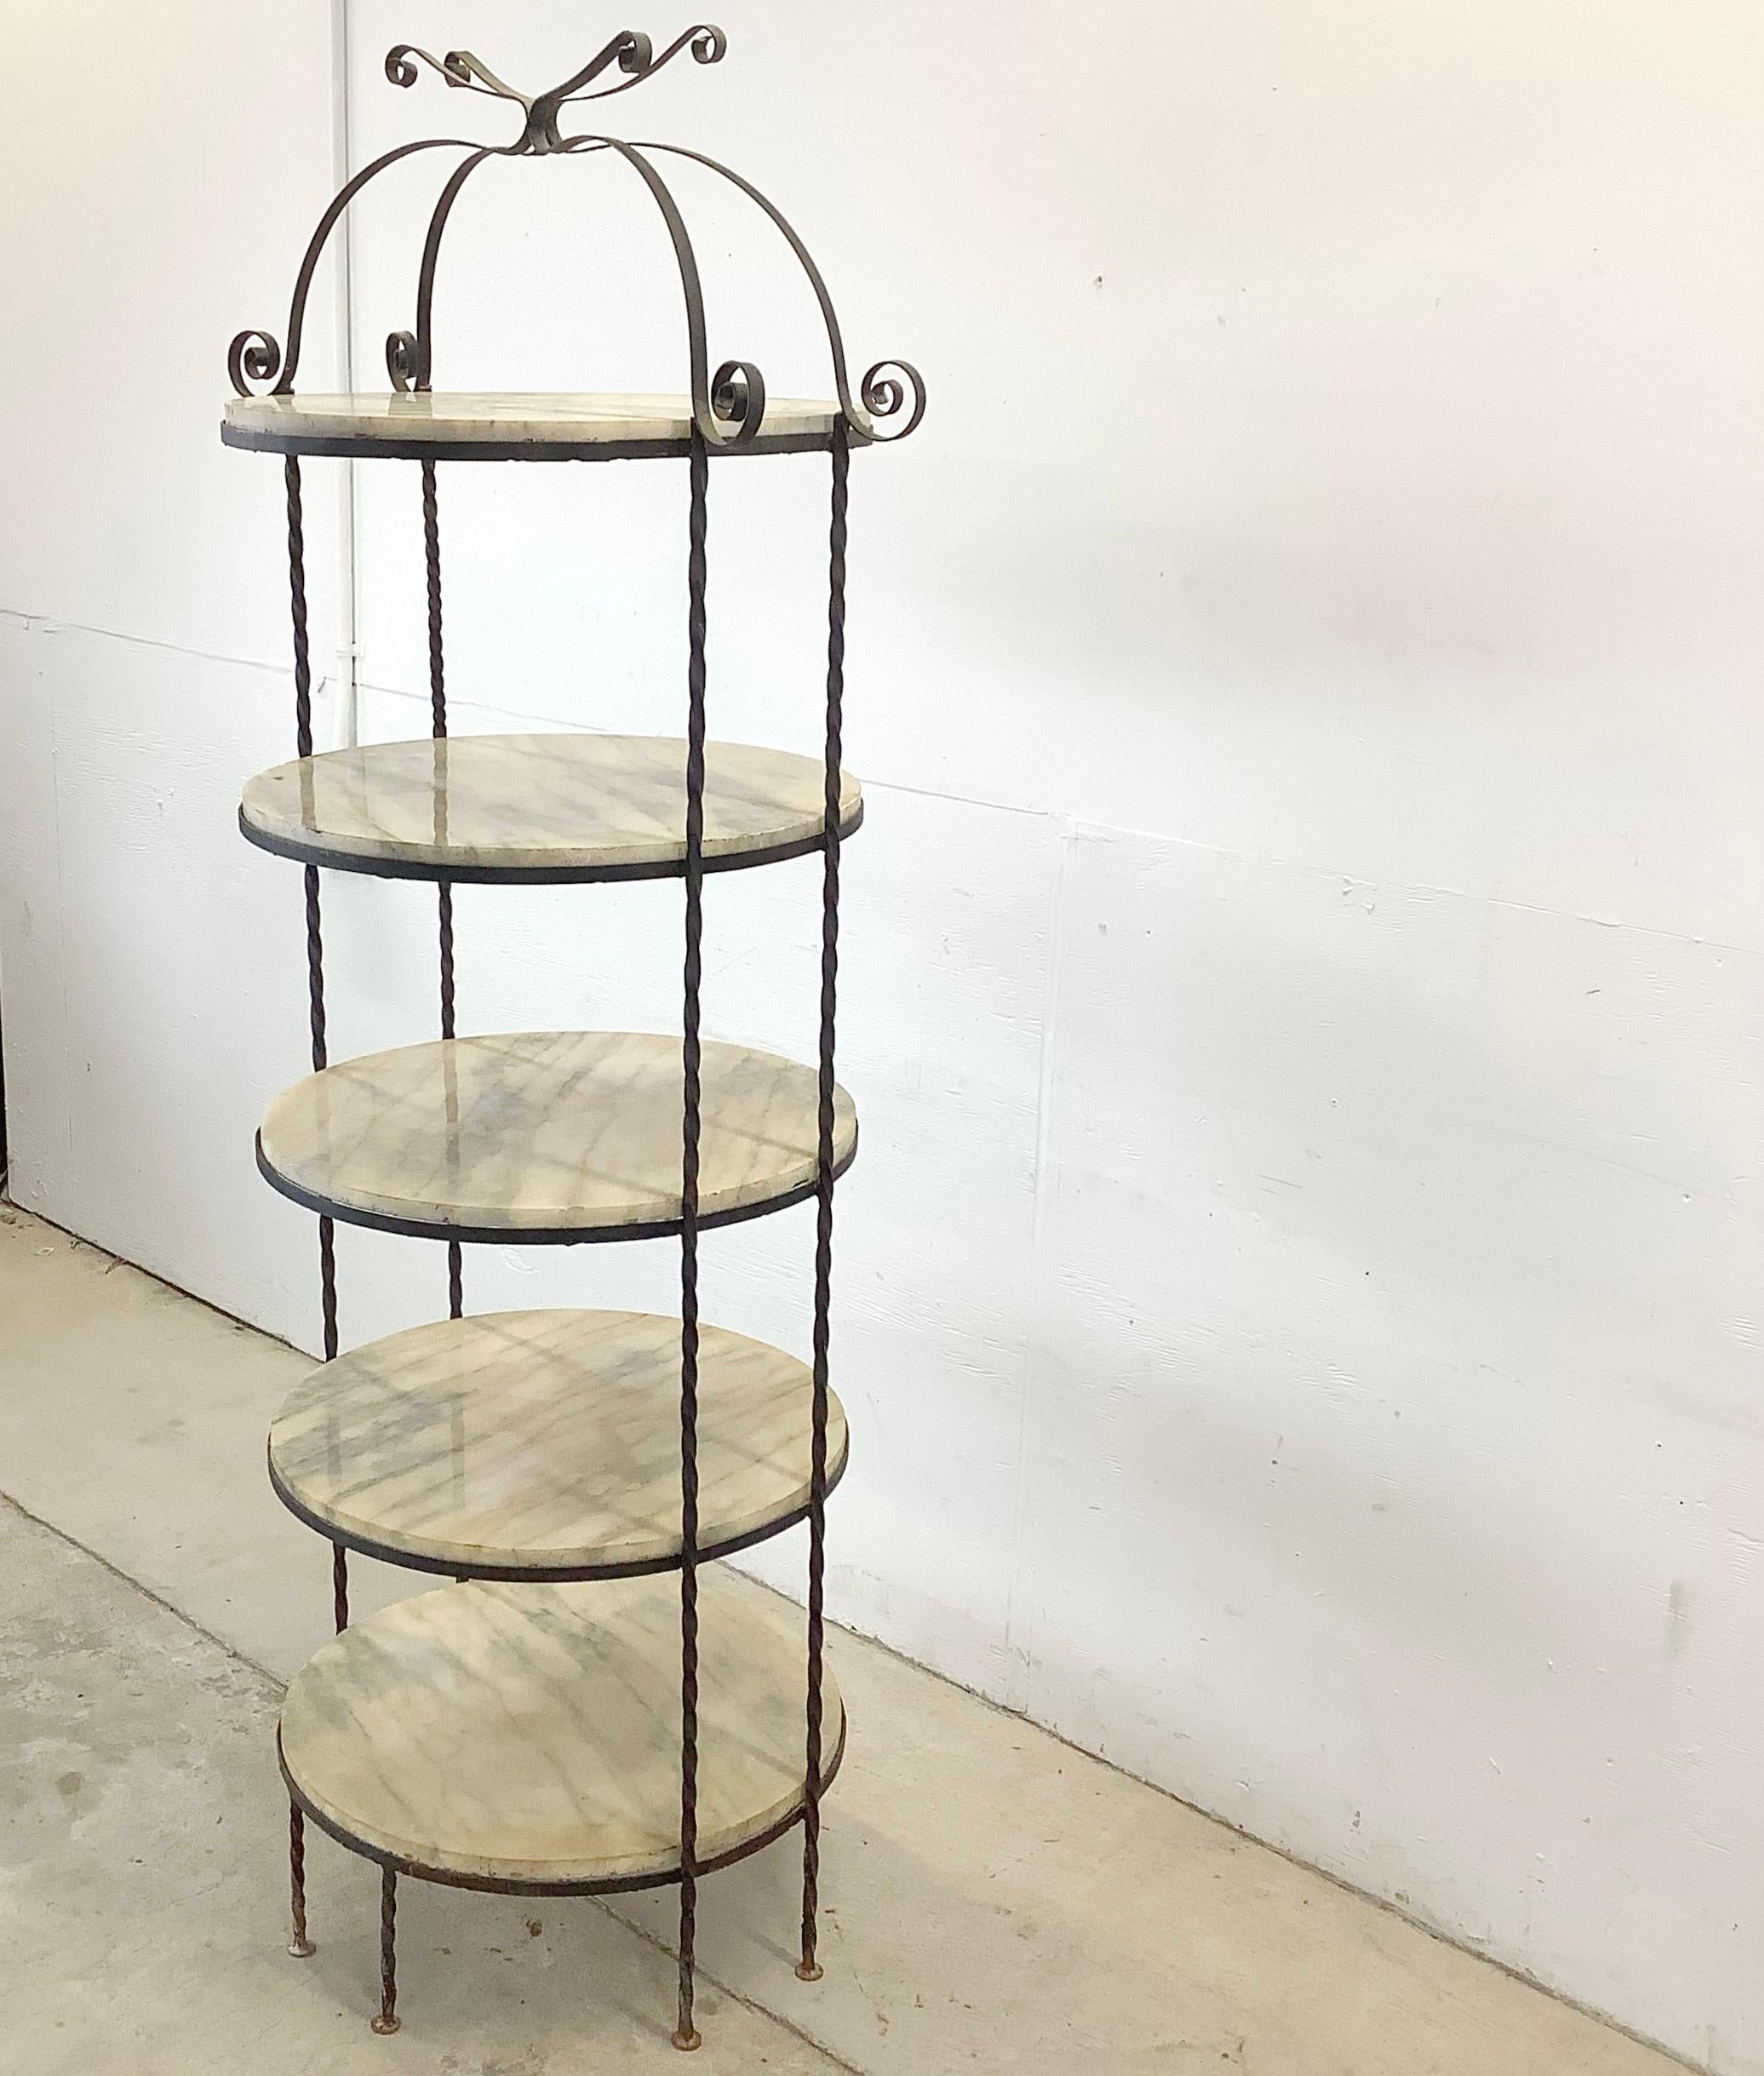 Vintage Farmhouse Shelf in Iron and Marble In Fair Condition For Sale In Trenton, NJ